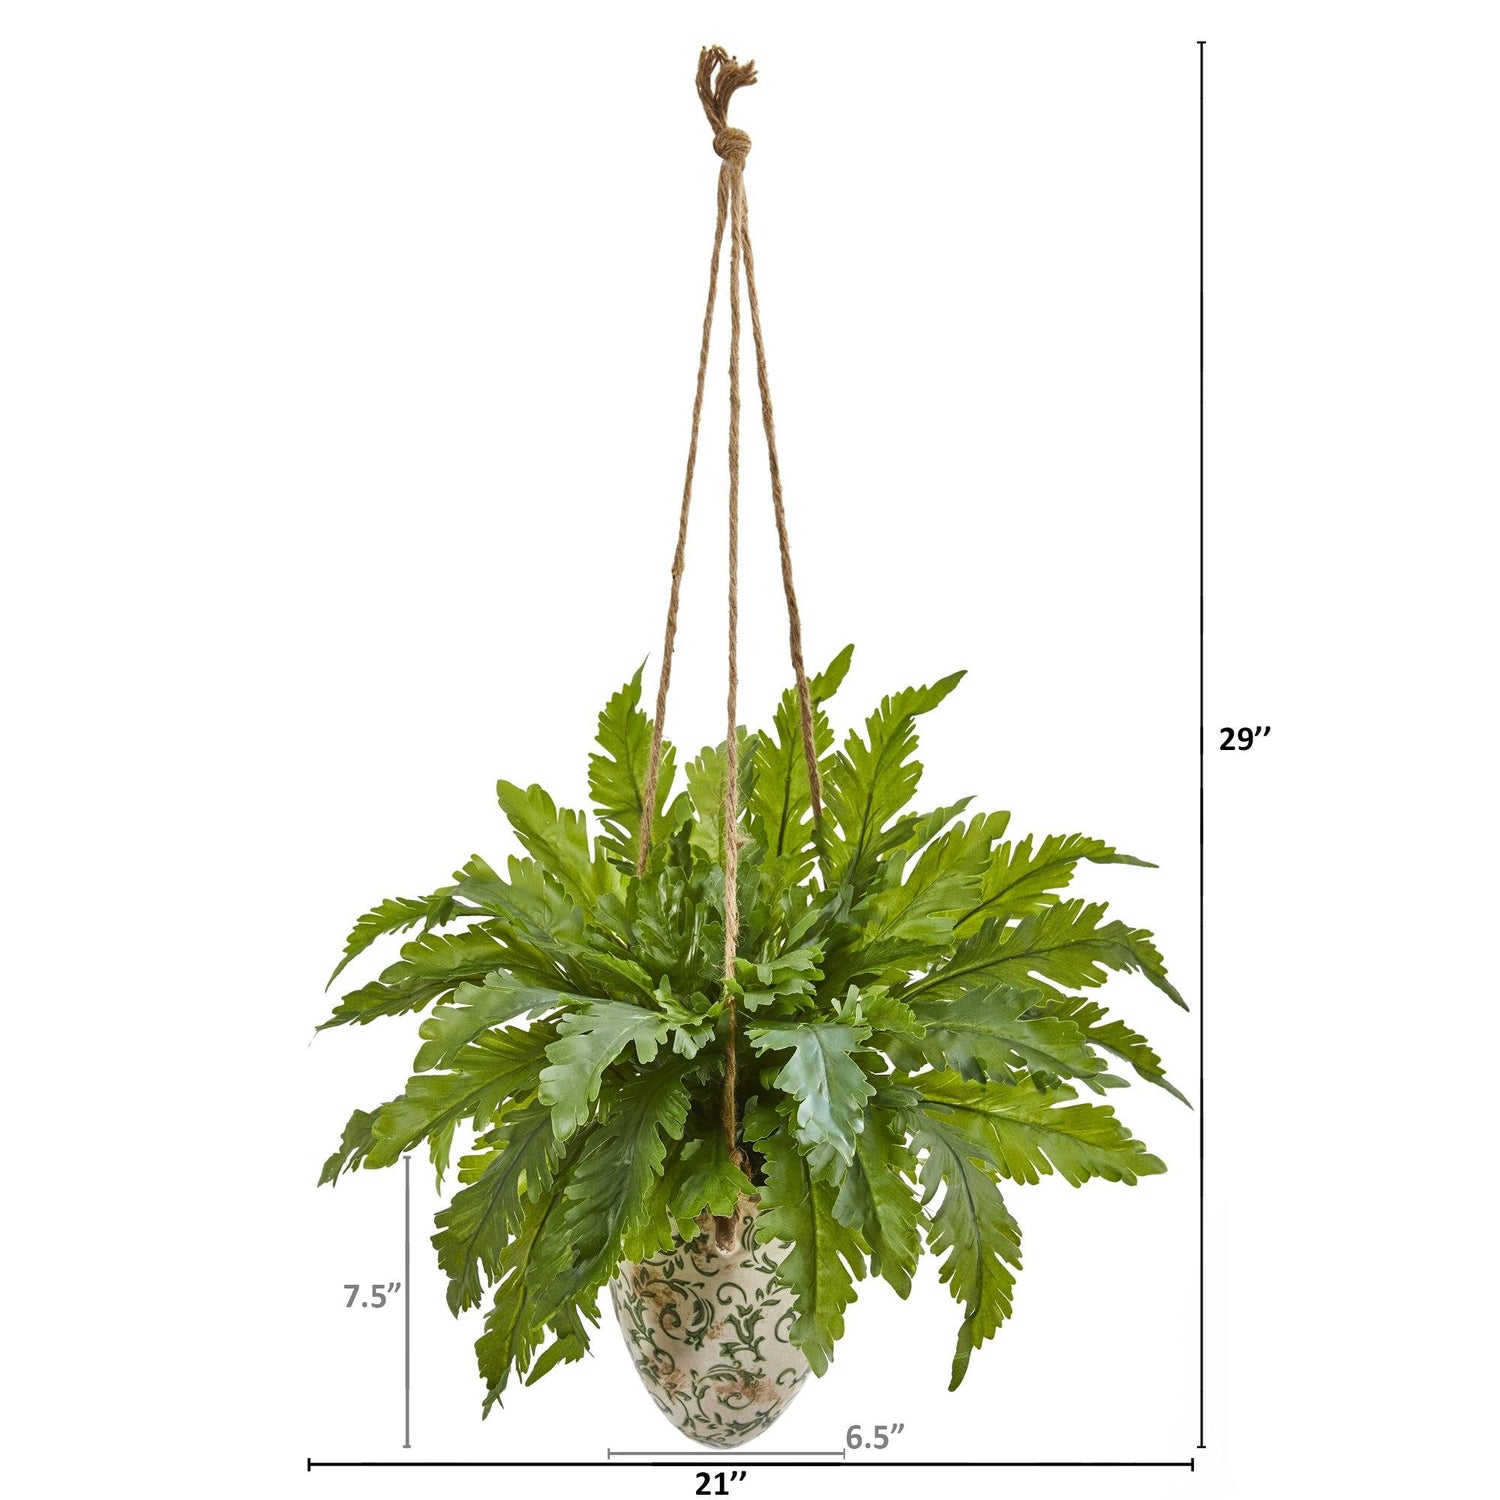 29” Fern Artificial Plant in Hanging Vase